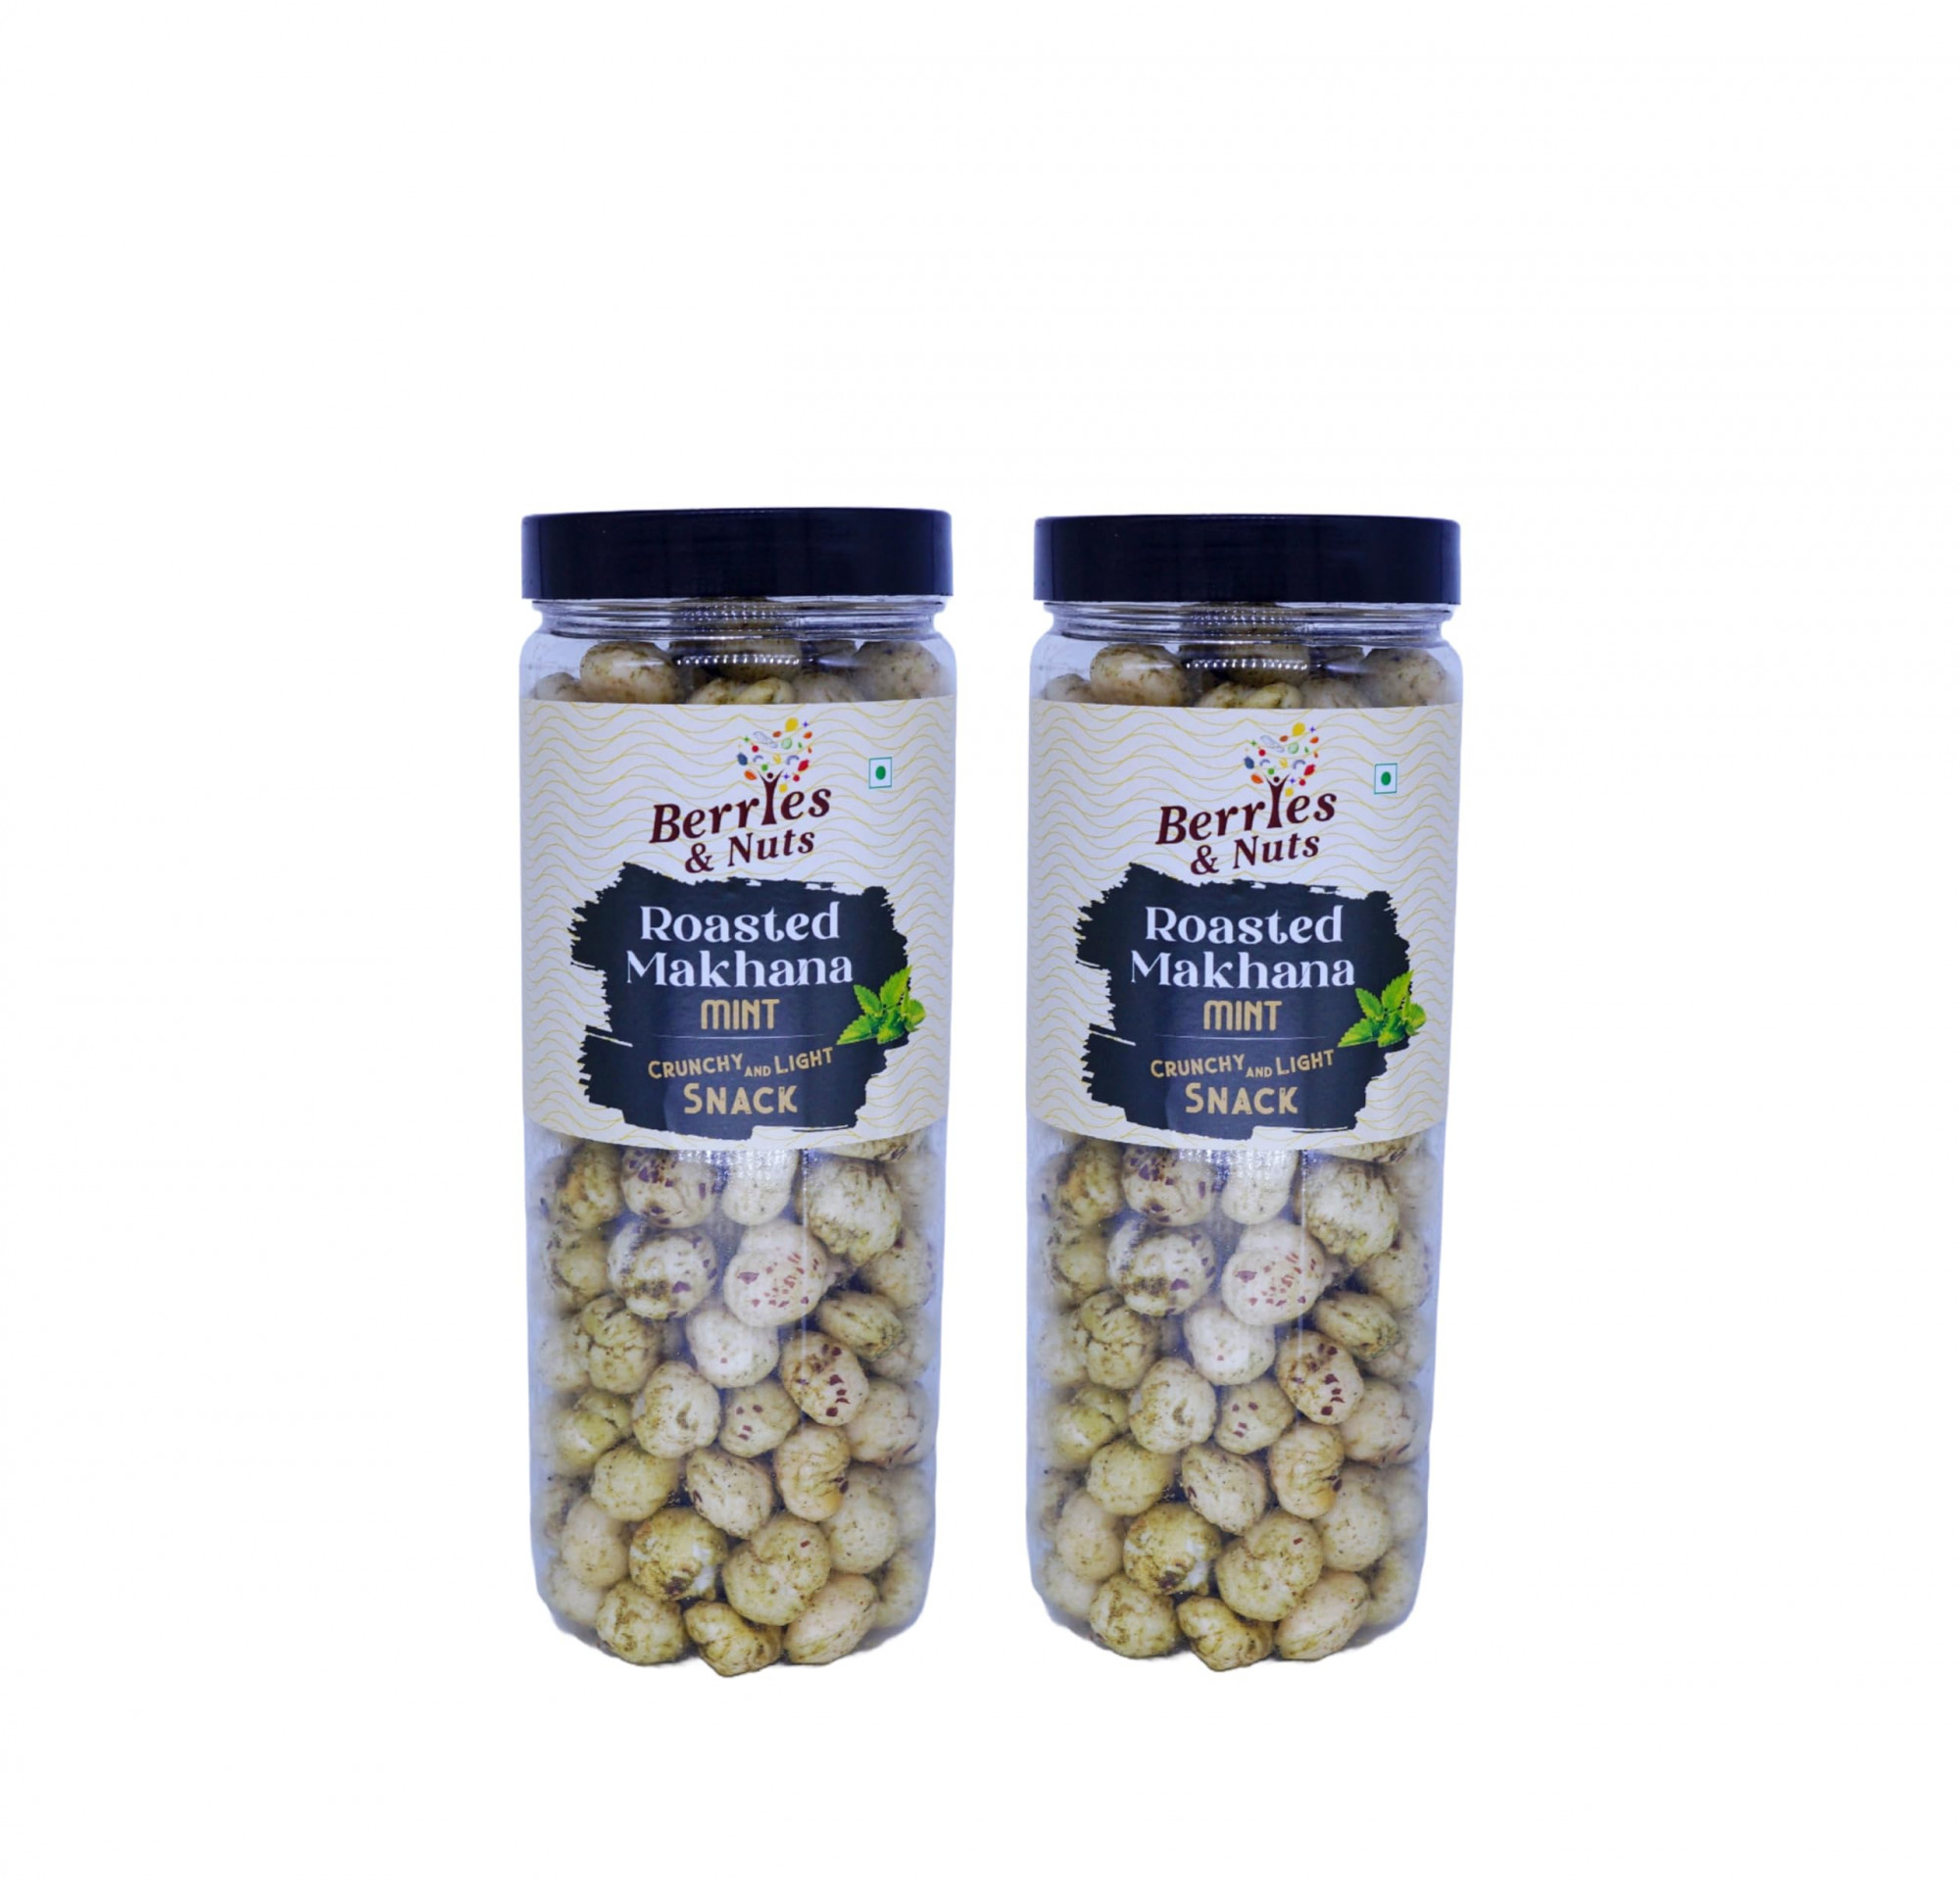 Berries & Nuts Mint Flavored and Roasted Makhana, Healthy Snacks, Super Food, 70 Grams (Pack of 2)